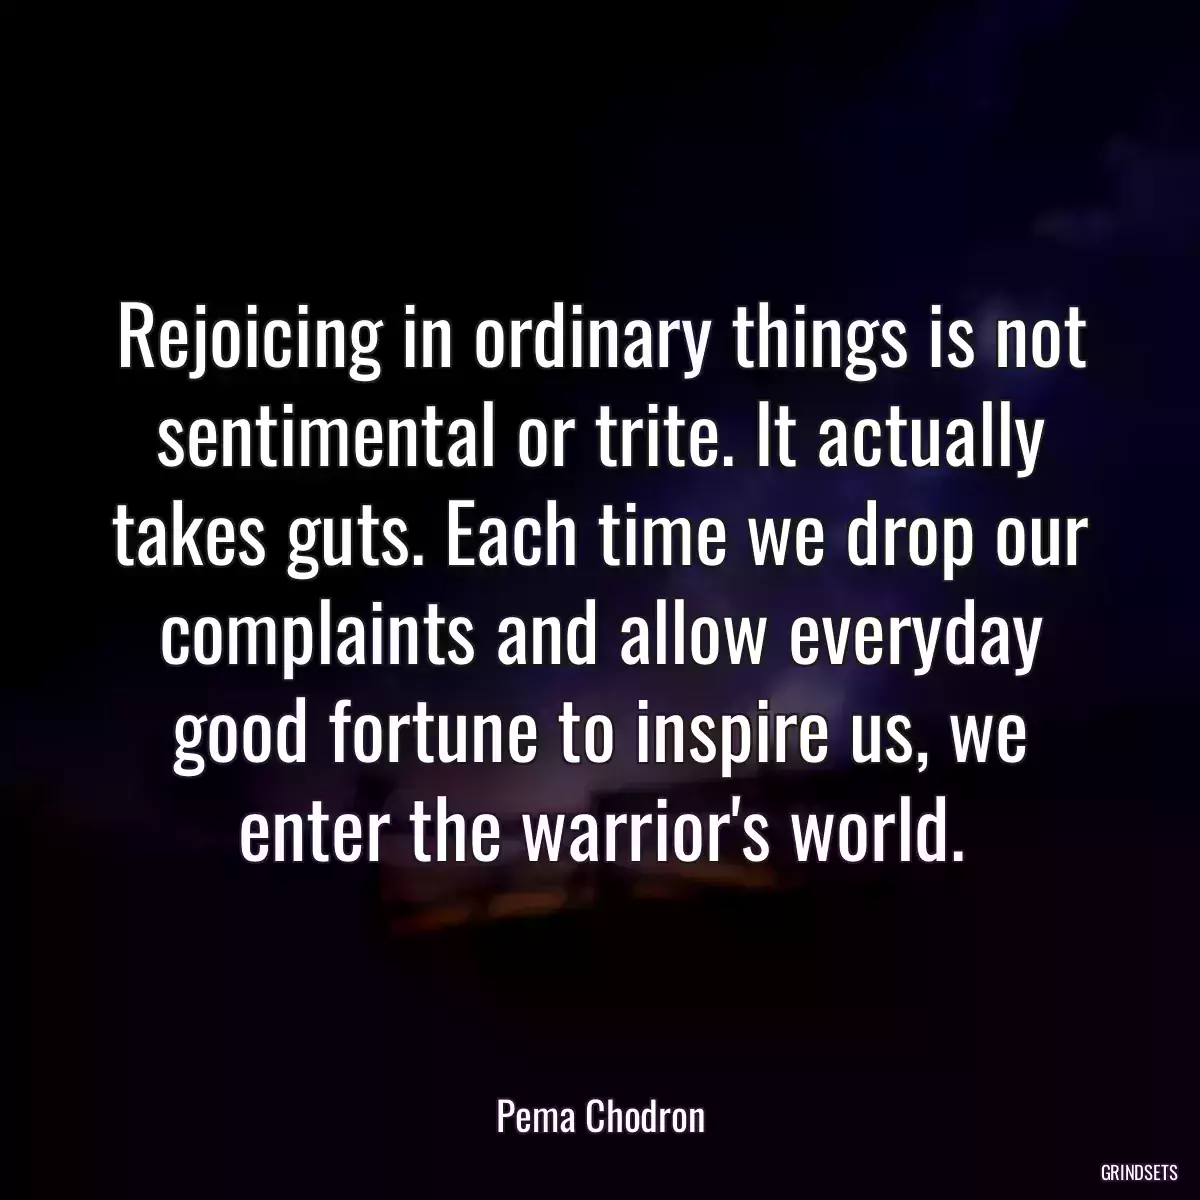 Rejoicing in ordinary things is not sentimental or trite. It actually takes guts. Each time we drop our complaints and allow everyday good fortune to inspire us, we enter the warrior\'s world.